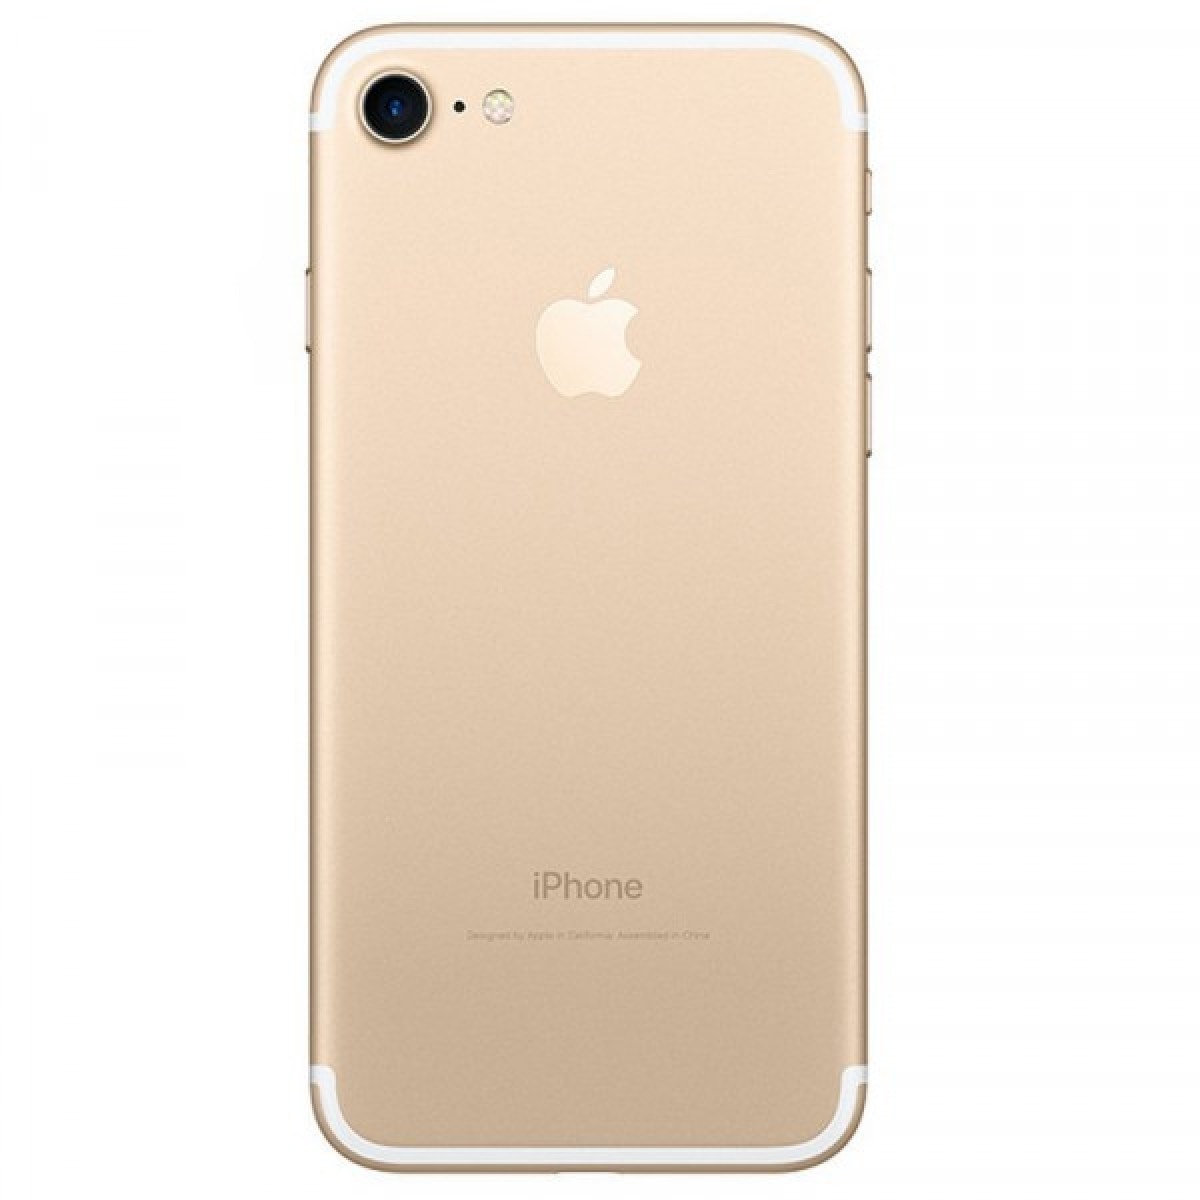 iphone 7 gold back